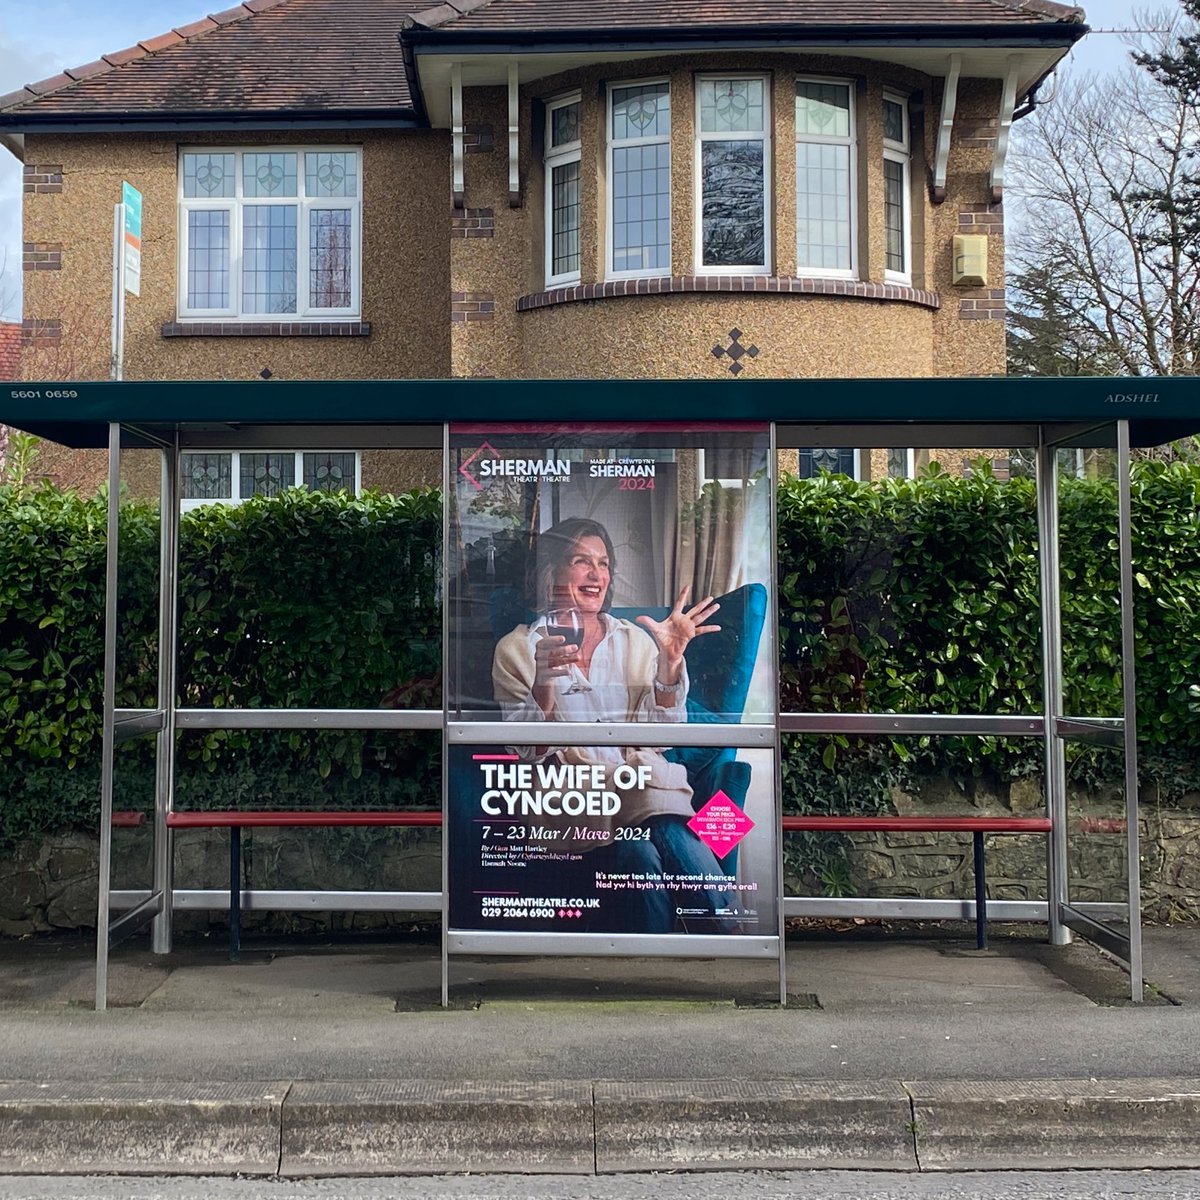 Have heard great things about @ShermanTheatre’s #TheWifeOfCyncoed, written by Matt Hartley. “Vivien Parry gives a magnificent performance.” – my mum